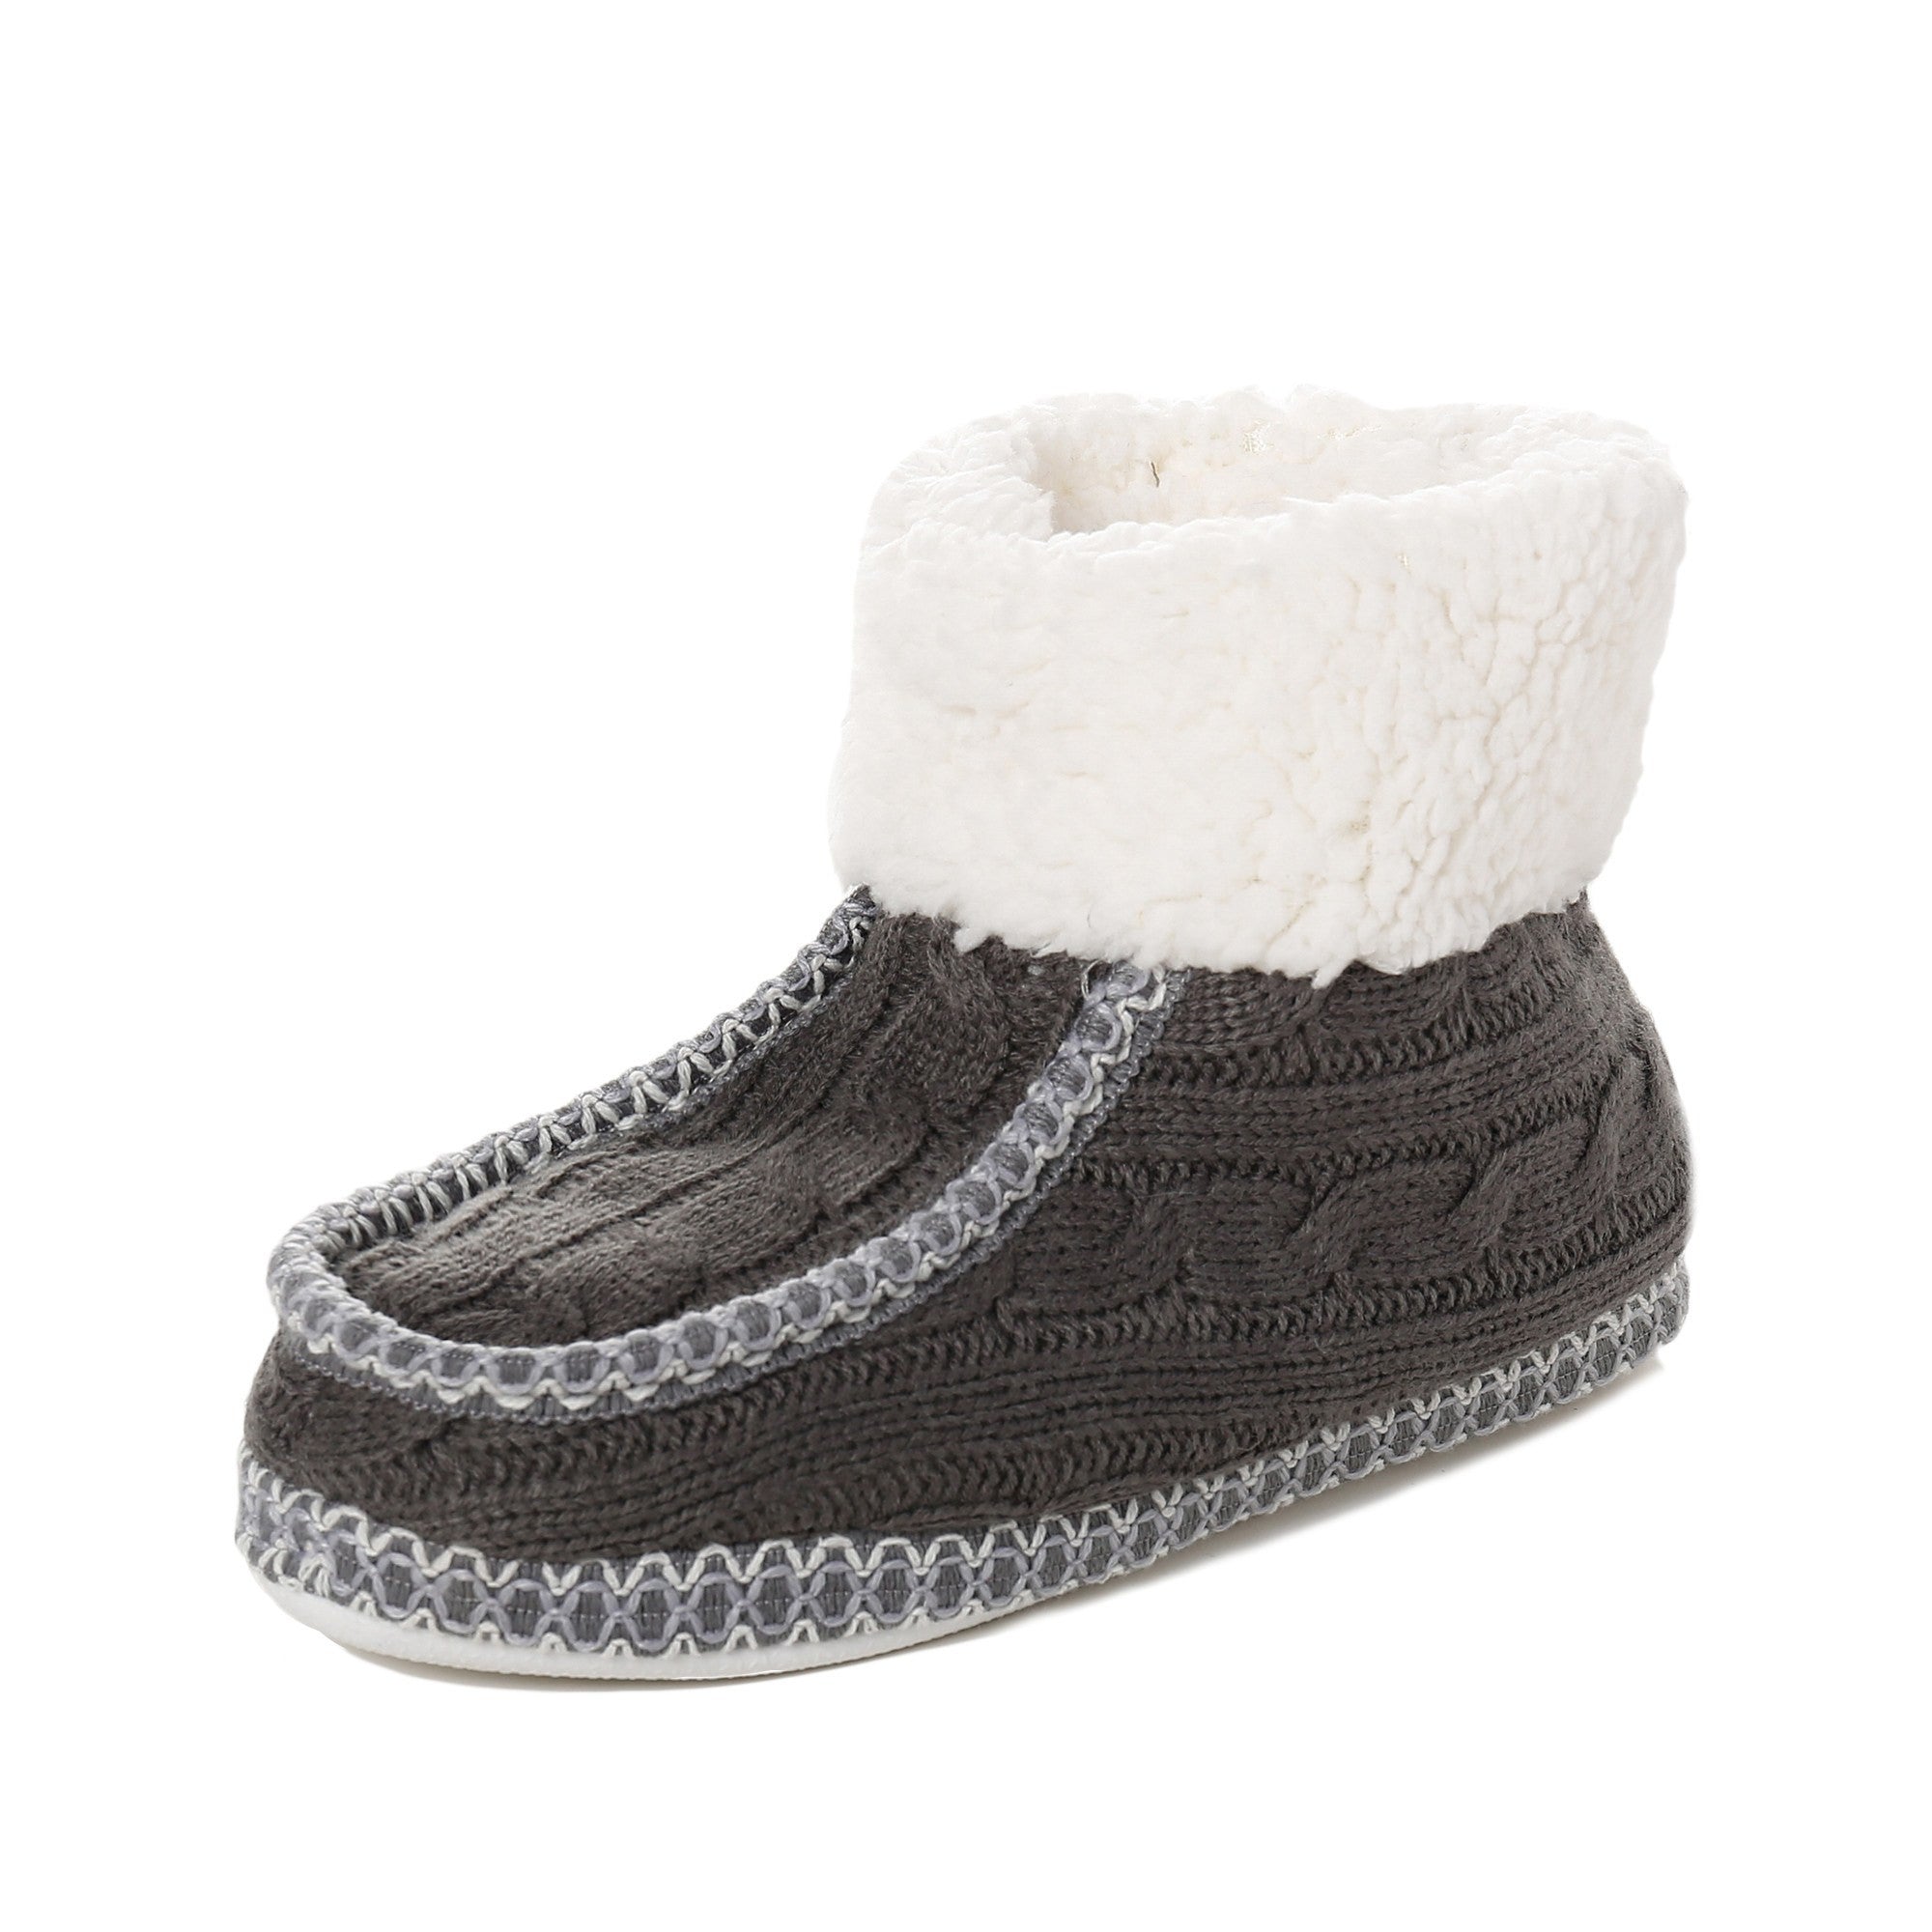 Women's Cable Knit Boot Moccasin Slipper